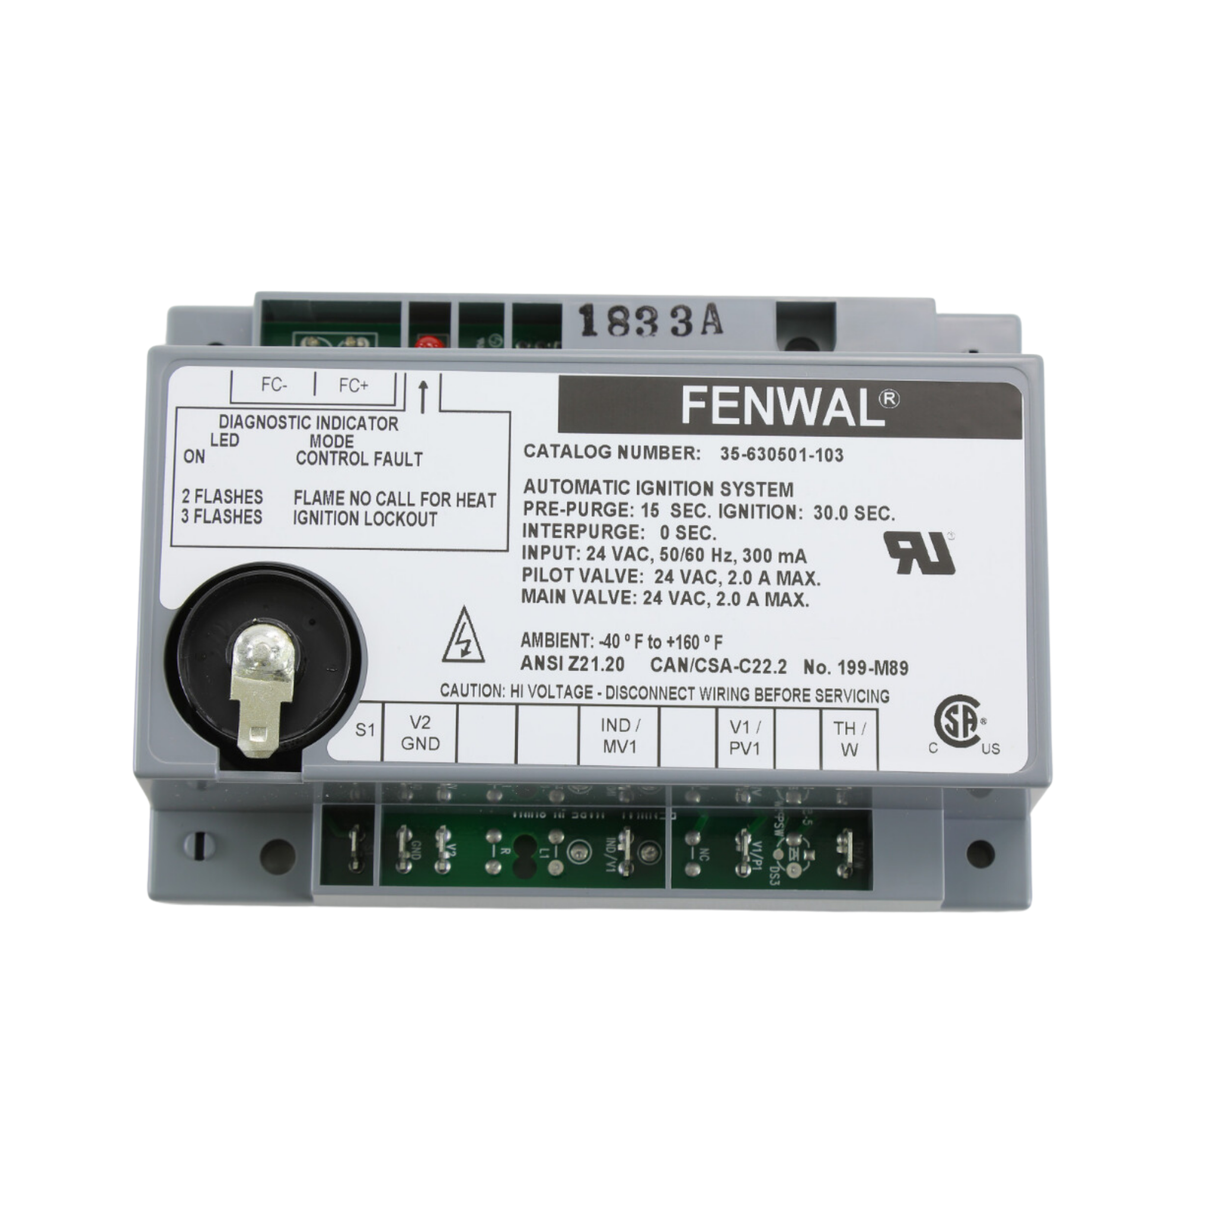 Fenwal 35-630501-103 24VAC, 15s Pre-Purge, 0 Inter-Purge, 30s Ignition Time, IP, Spark Ignition Module